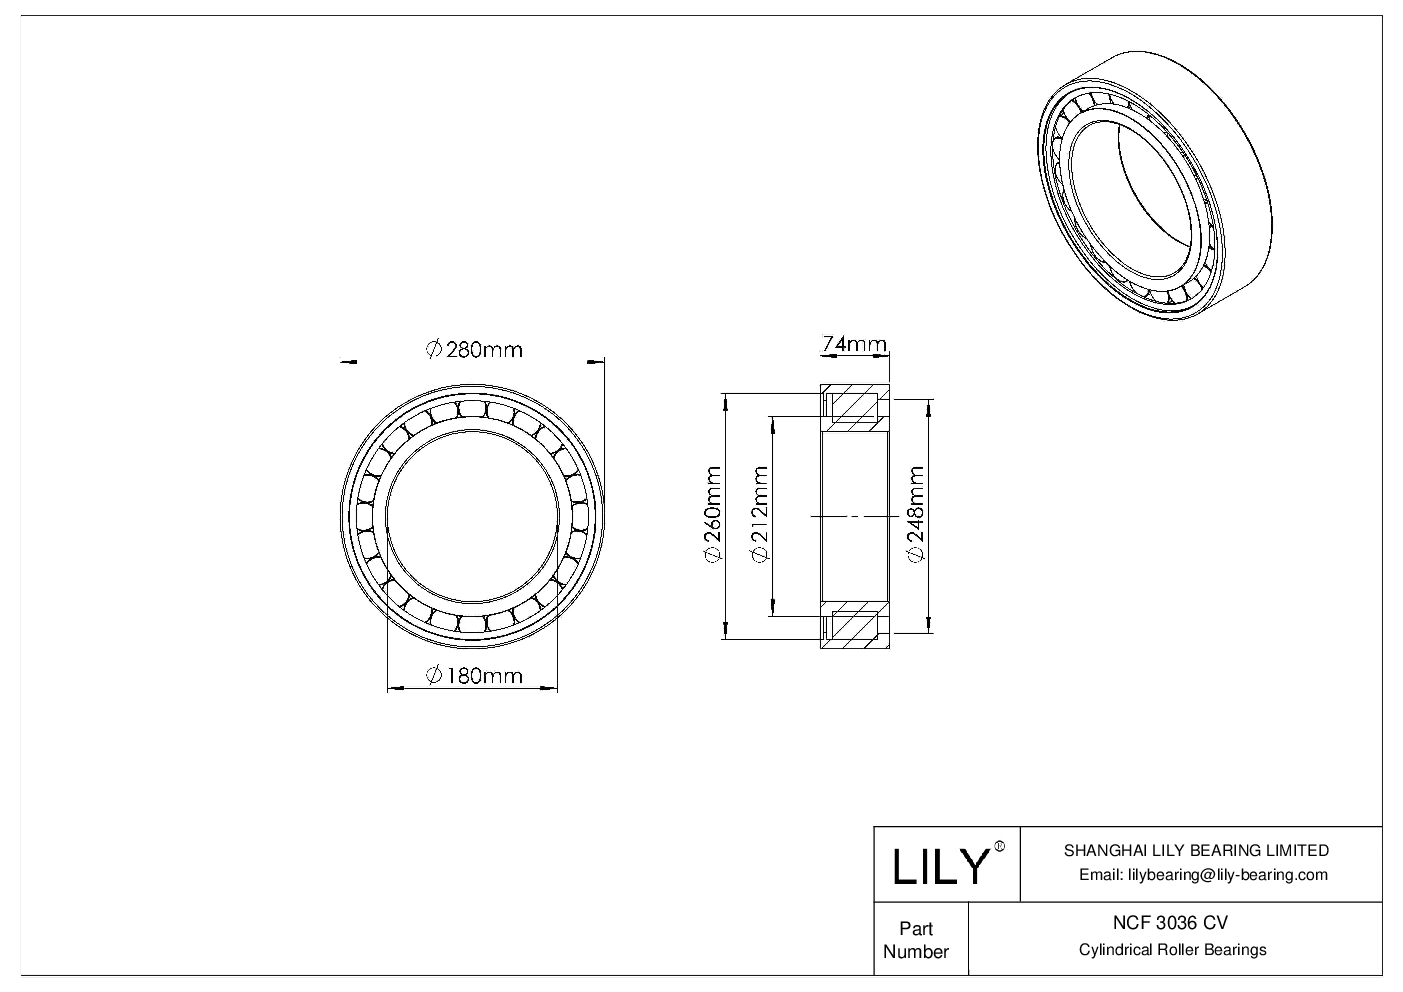 NCF 3036 CV Single Row Full Complement Cylindrical Roller Bearings cad drawing